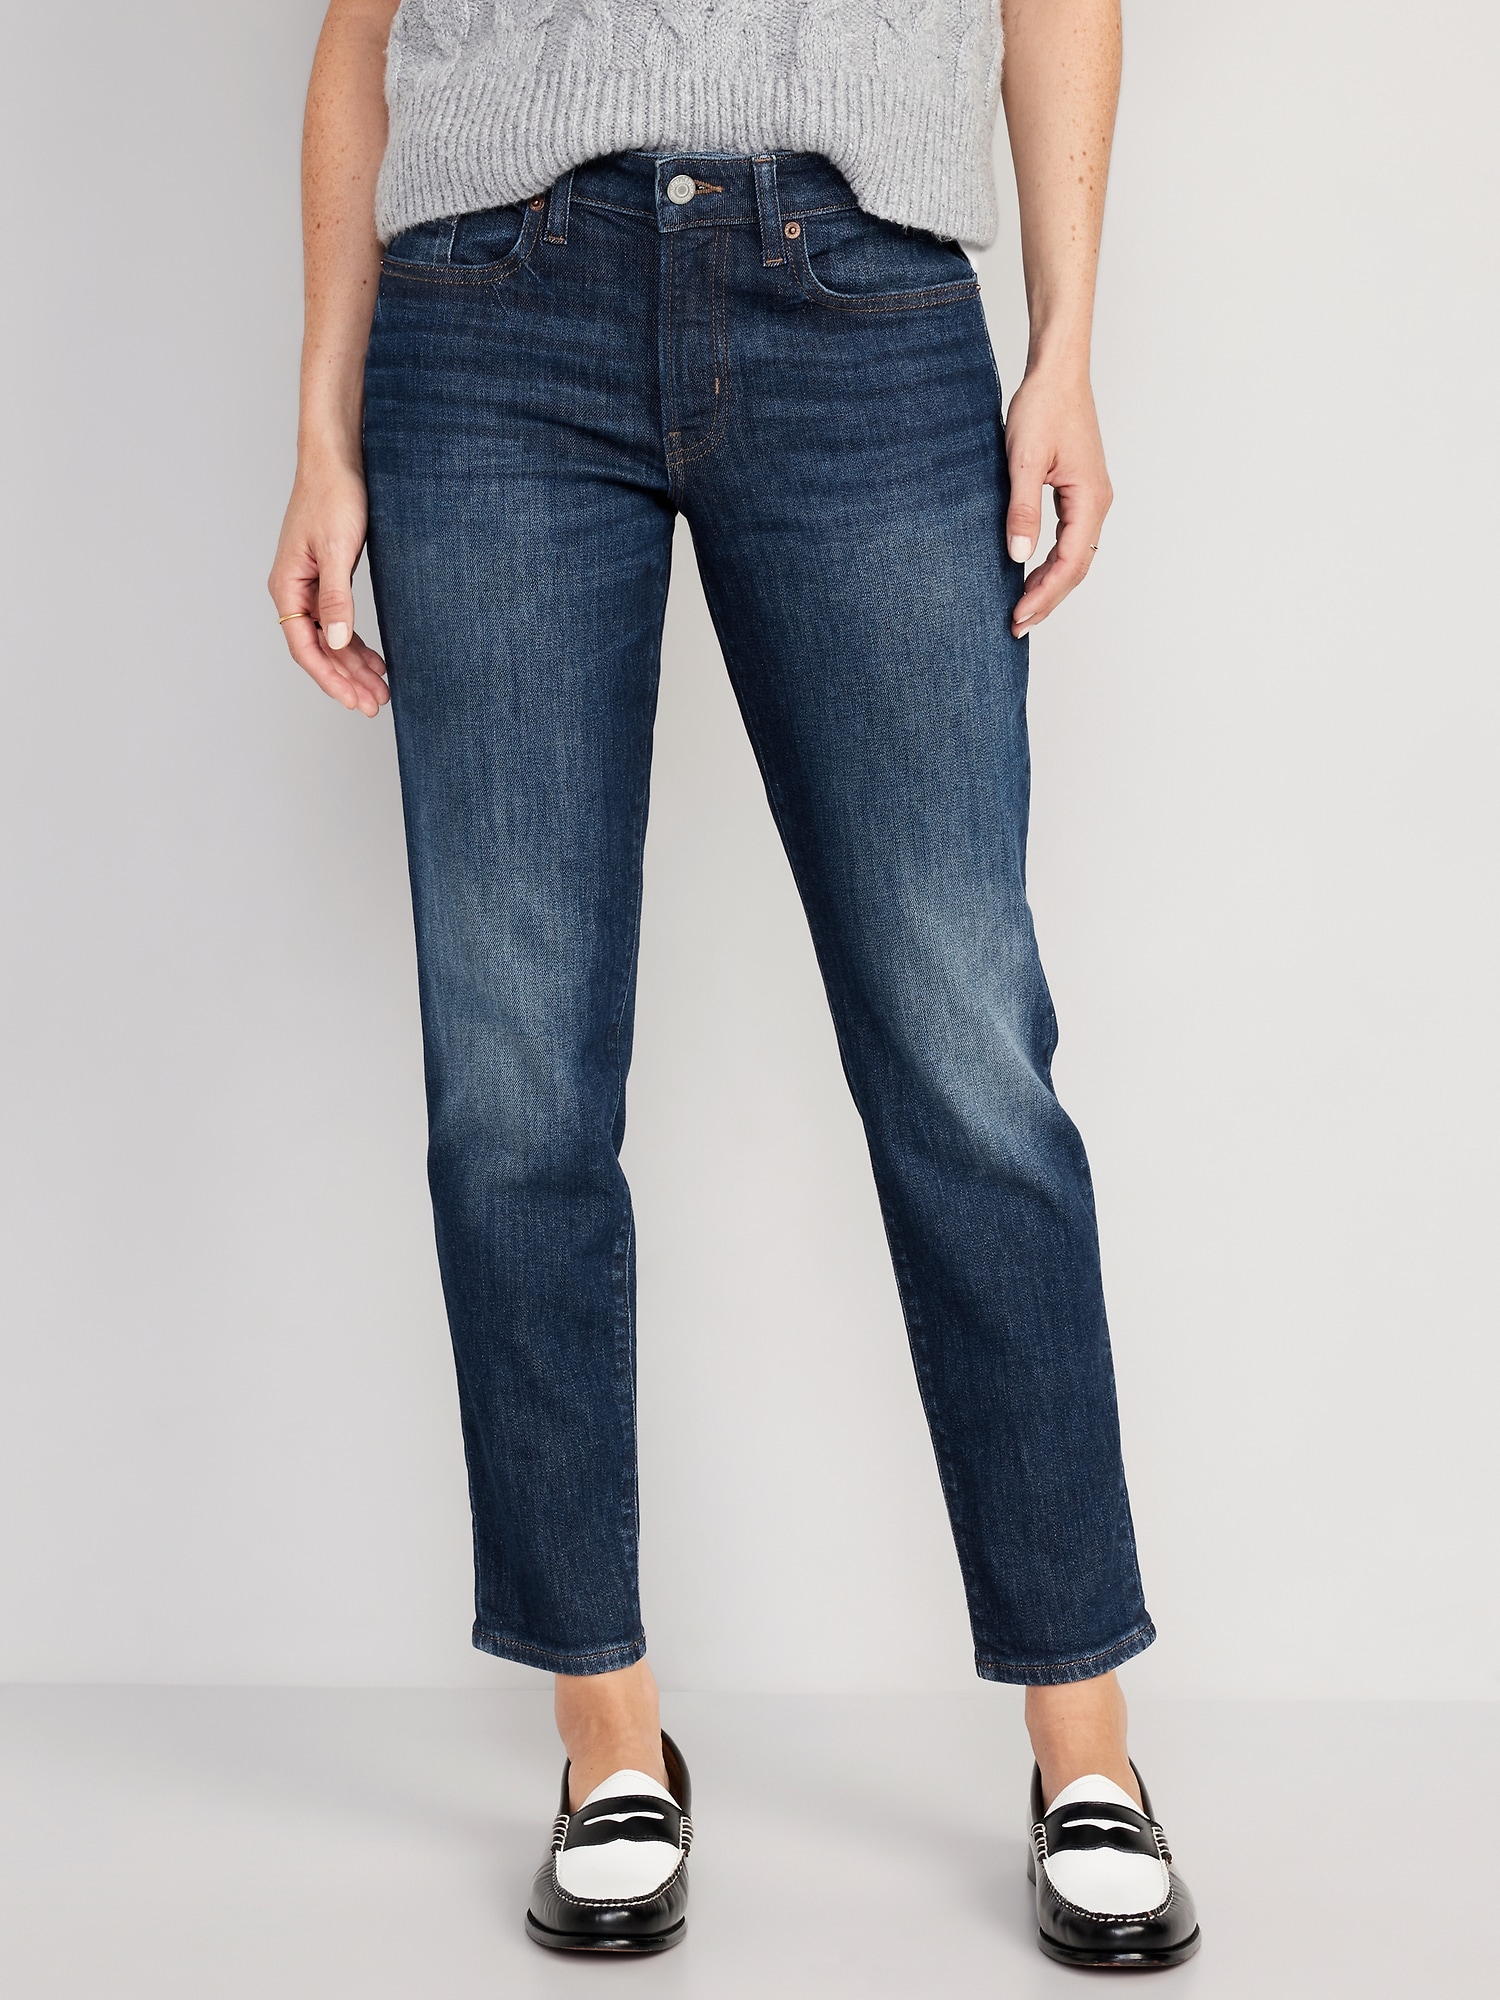 Review of the Week: Old Navy Jeans